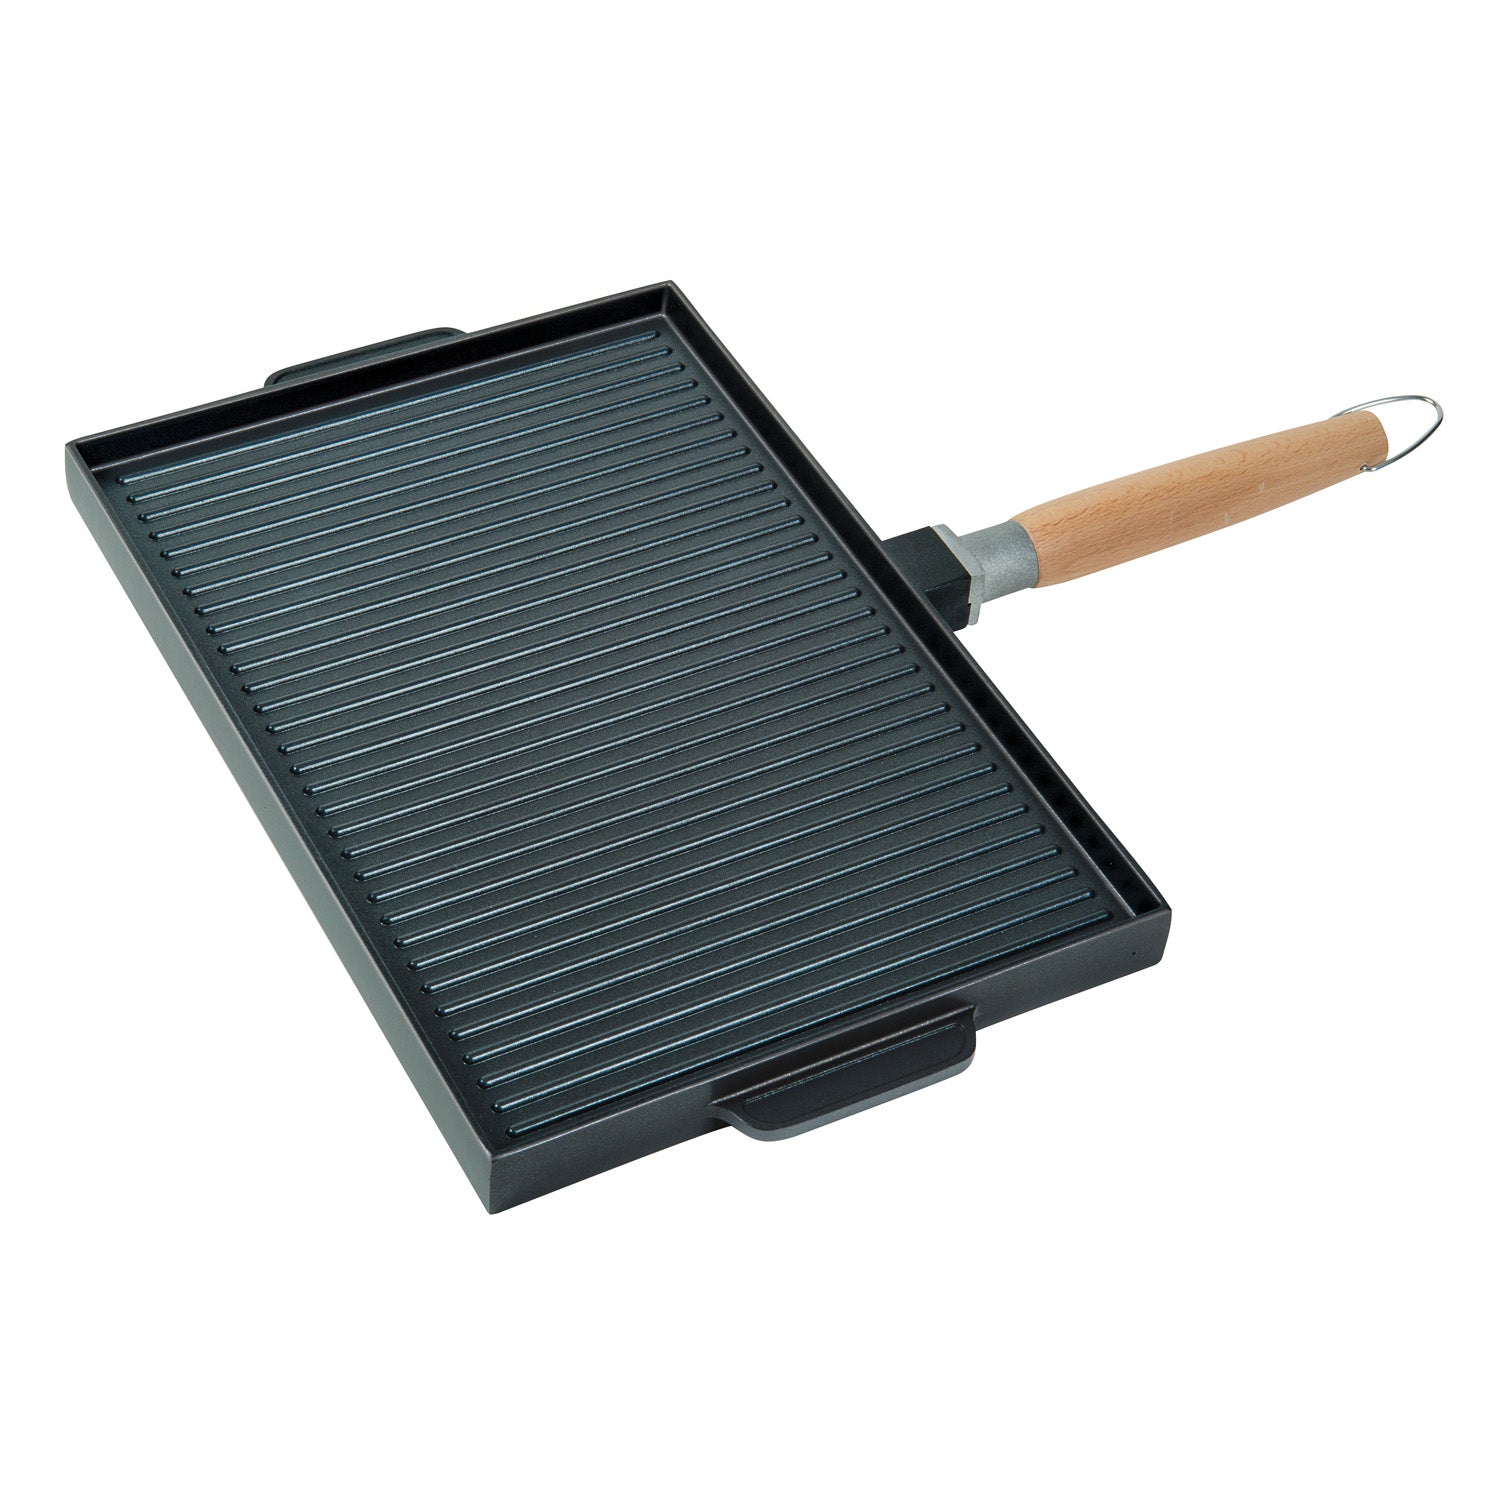 TOPINCN Non-Stick Cast Iron Grill Griddle Pan Ridged and Flat Double-Sided  Baking Cooking Tray Bakeware,Non Stick Griddle Pan 